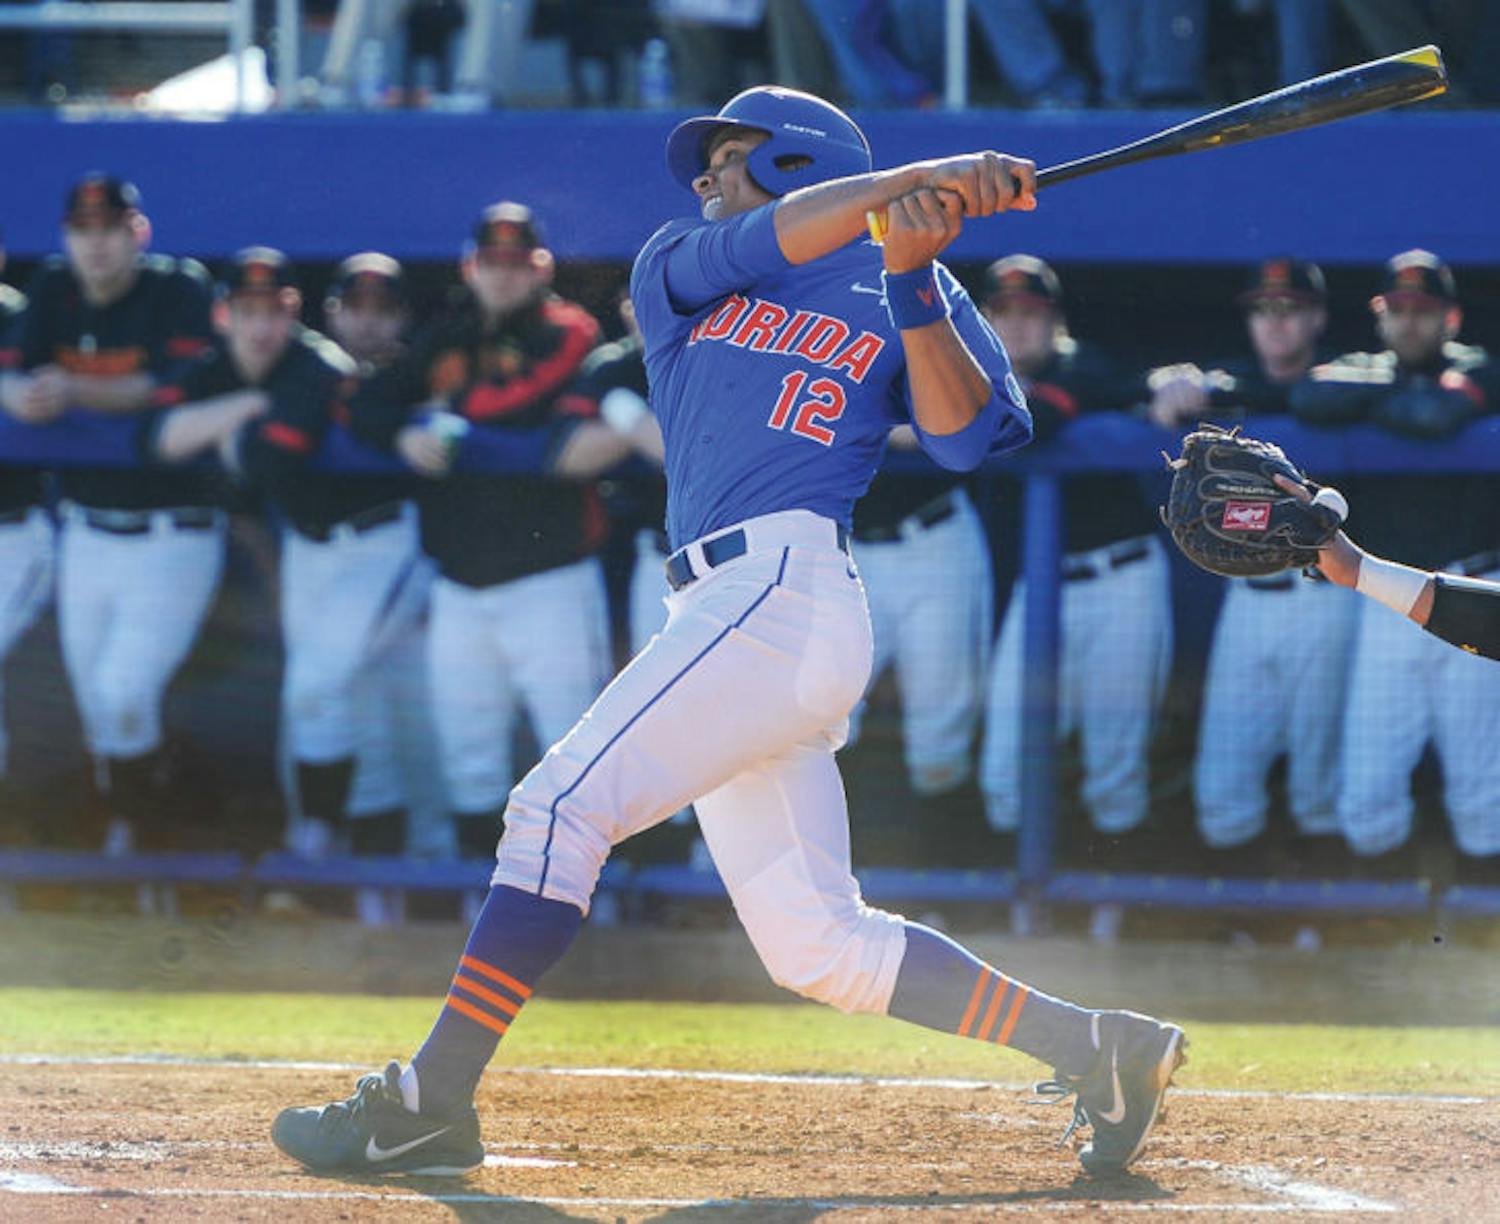 Richie Martin hits during Florida’s 9-7 loss against Maryland on Feb. 15 at McKethan Stadium. Martin went 3-for-3 at the plate and scored three runs in UF's 8-2 win against USF on Tuesday.